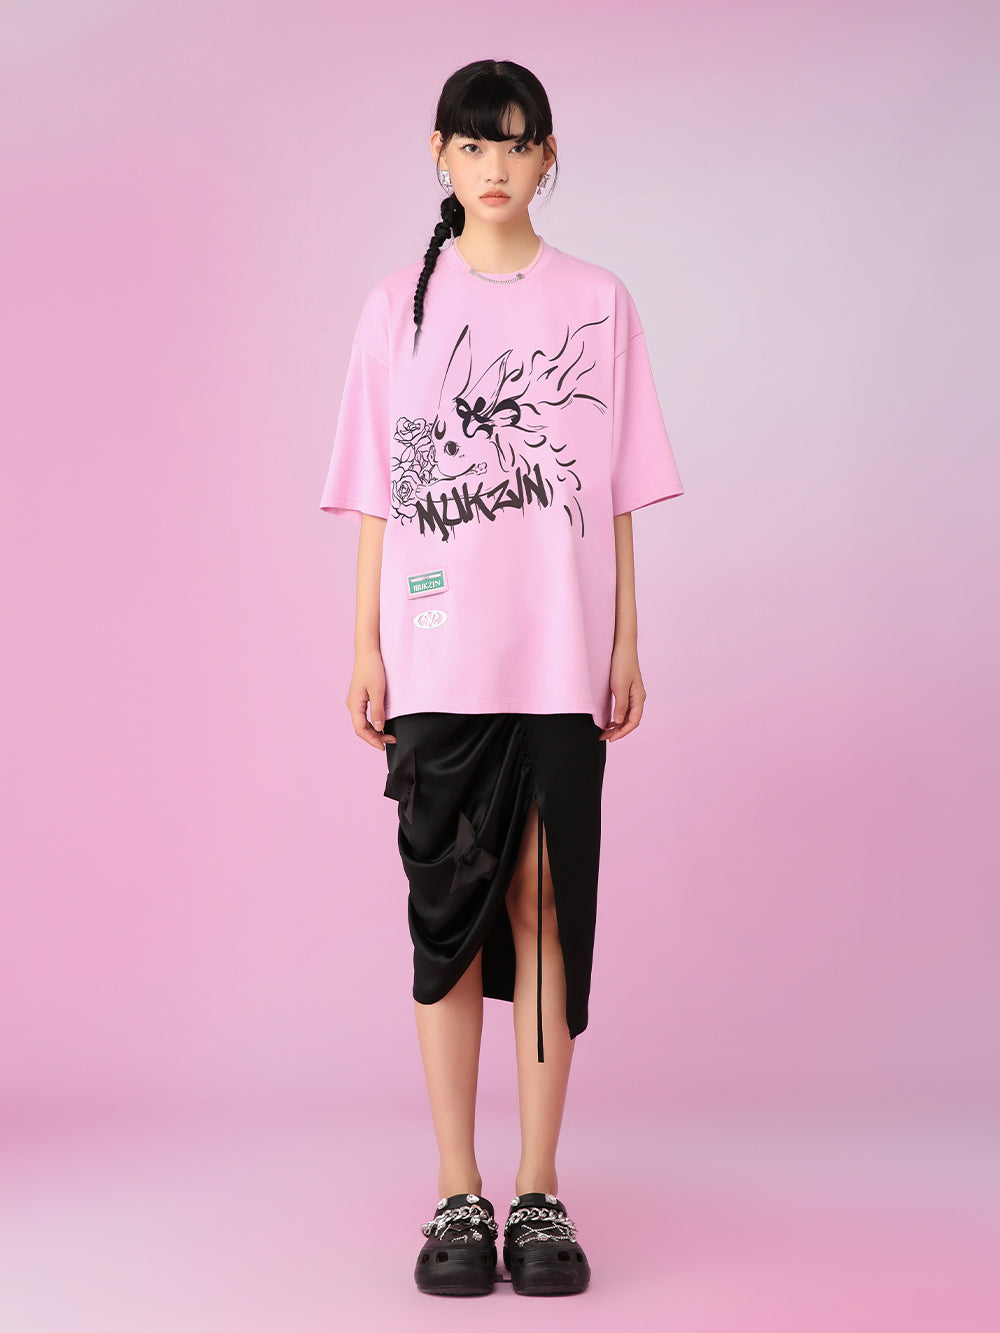 MUKZIN Loose Printed Casual All-match T-shirts